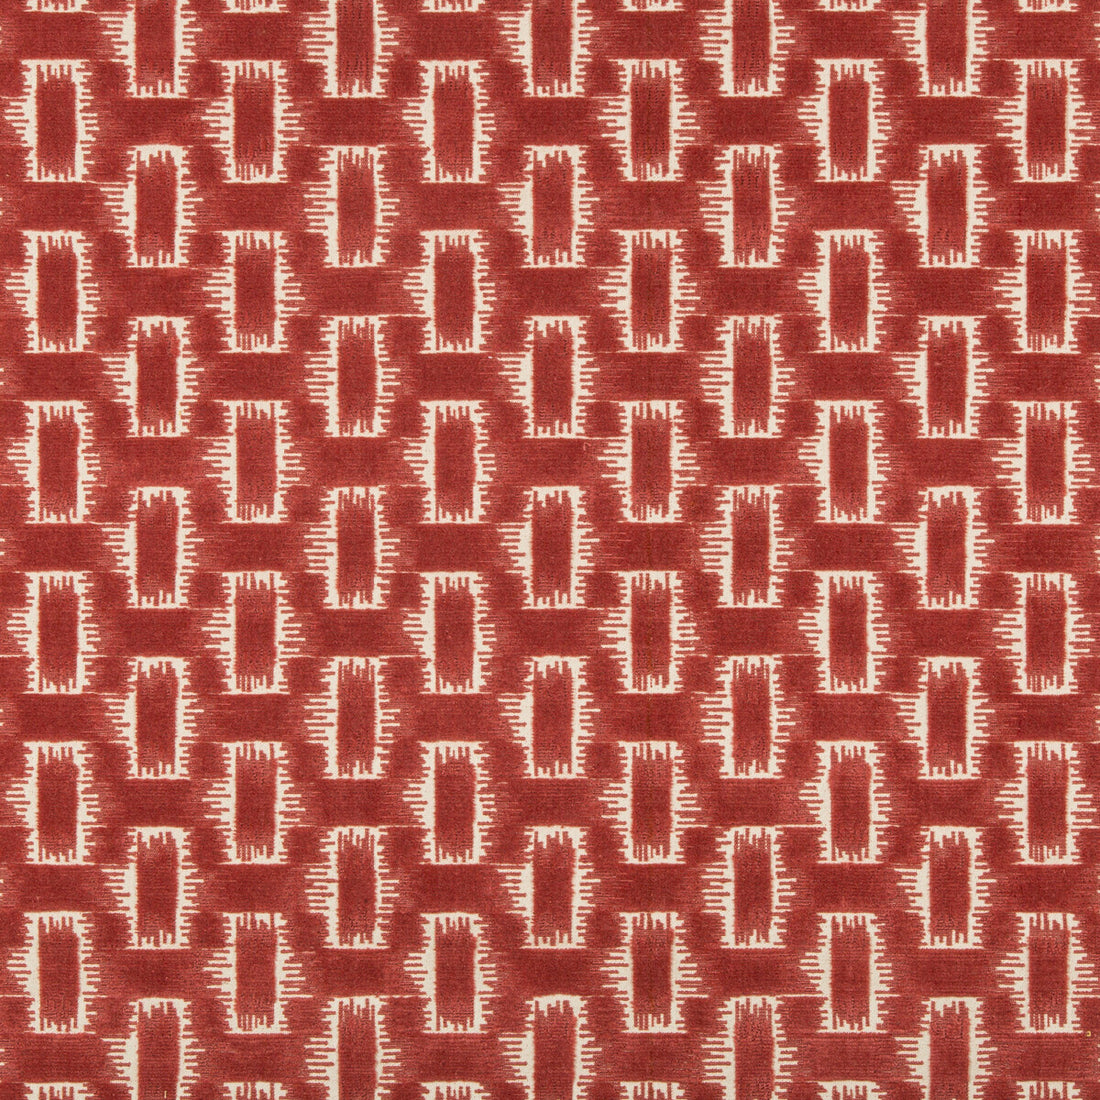 Chambord Velvet fabric in rose color - pattern 8020116.19.0 - by Brunschwig &amp; Fils in the Chaumont Velvets collection